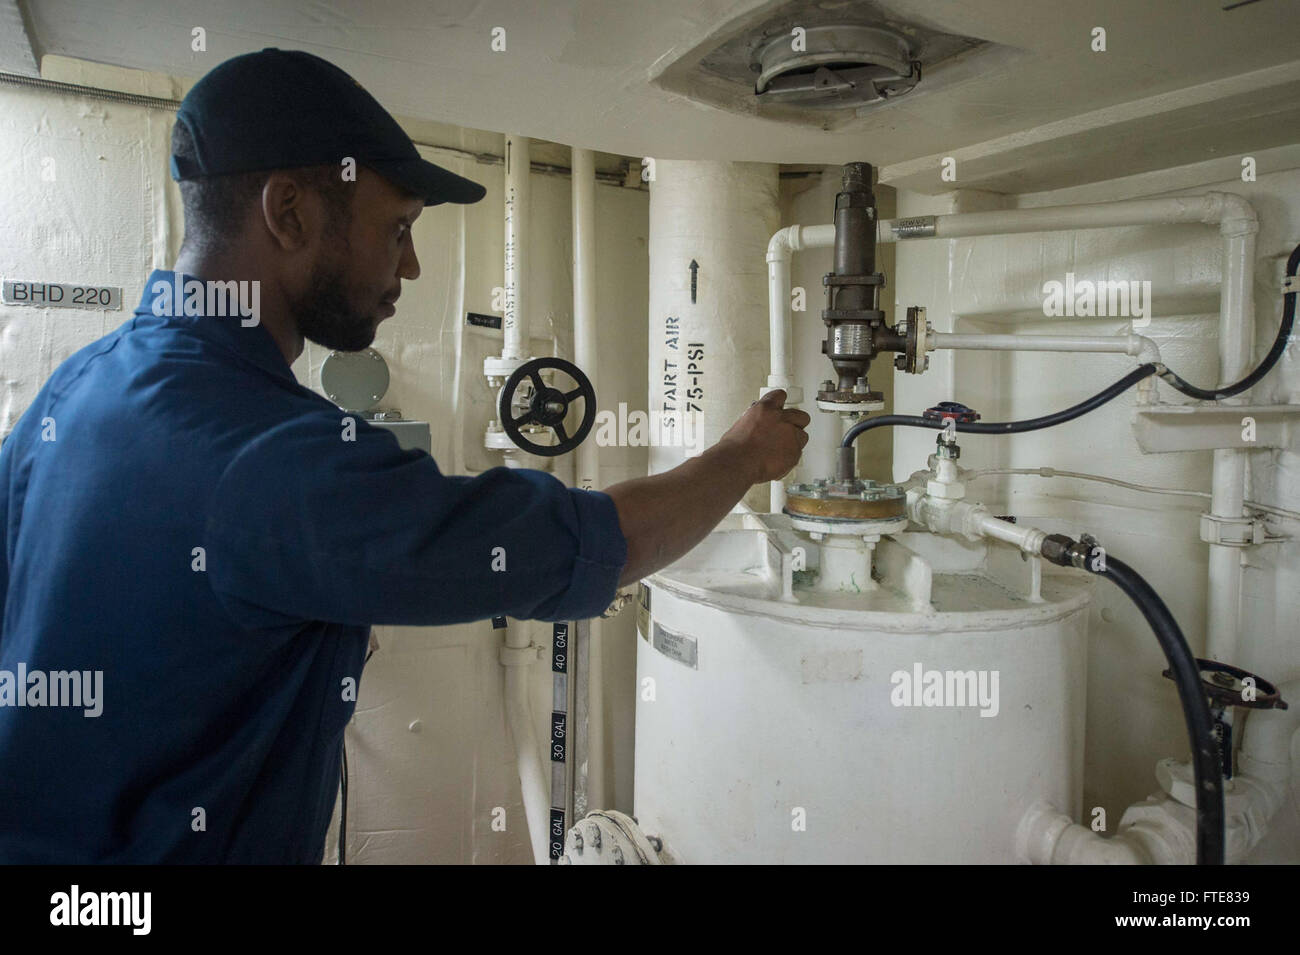 131126-N-VC236-005: SOUDA BAY, Greece (Nov. 26, 2013) - Gas Turbine System Technician (Mechanical) Fireman Gerard Plowden checks a valve while preparing to fill a gas turbine water wash tank aboard the Arleigh Burke-class guided-missile destroyer USS Ramage (DDG 61). Ramage is on a scheduled deployment supporting maritime security operations and theater security cooperation efforts in the U.S. 6th Fleet area of operations. (U.S. Navy Photo by Mass Communication Specialist 3rd Class Jackie Hart/Released) Stock Photo